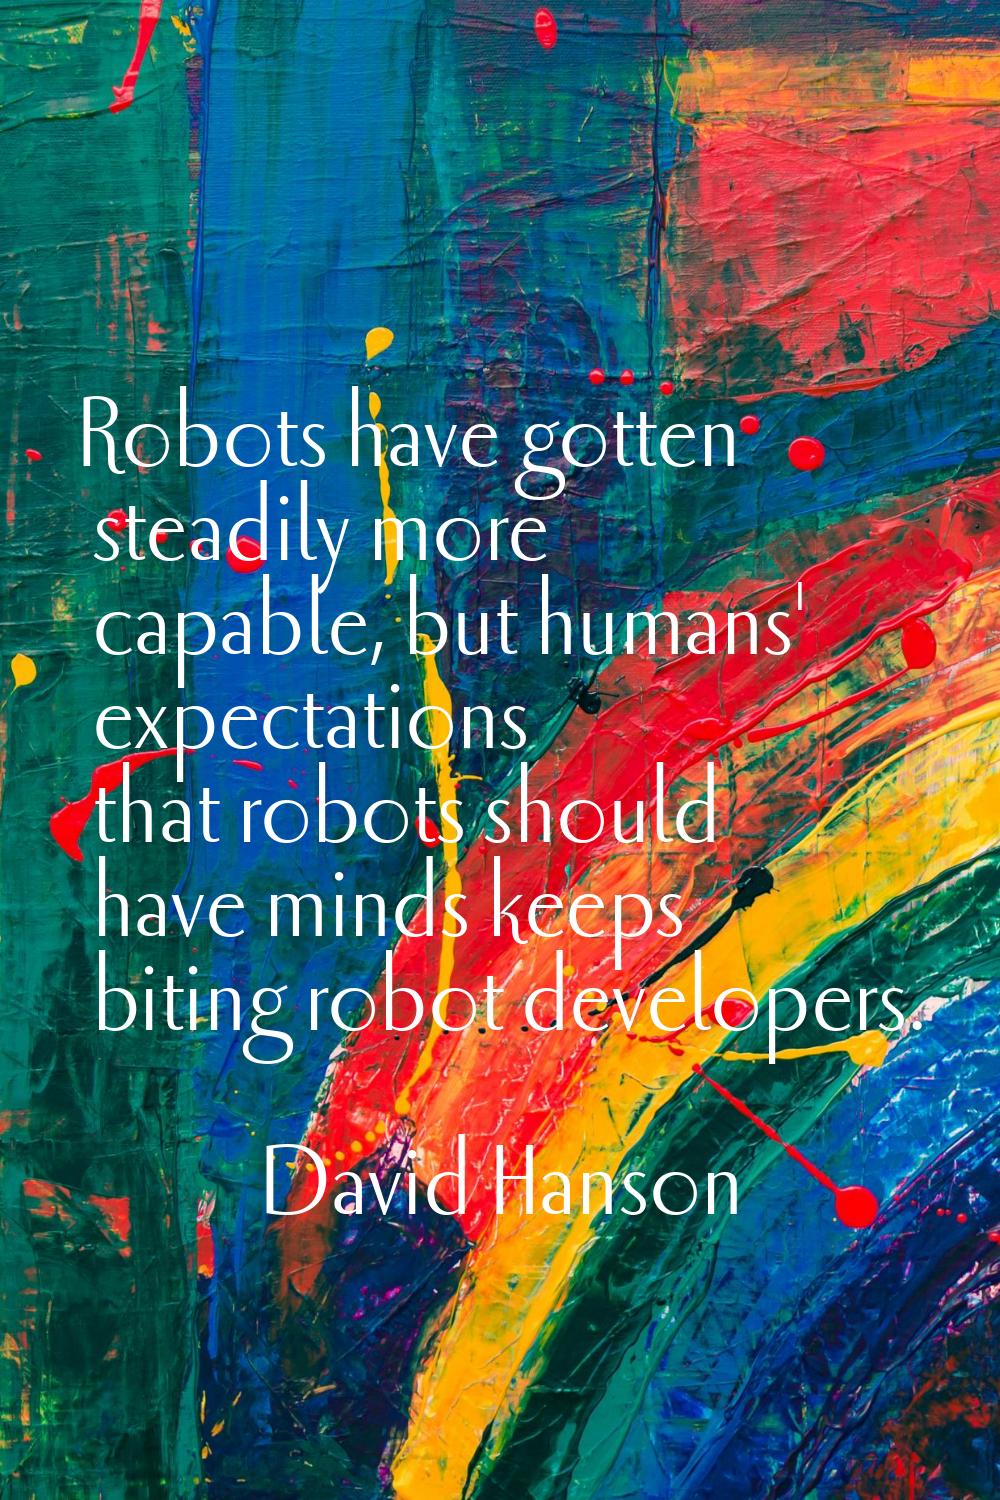 Robots have gotten steadily more capable, but humans' expectations that robots should have minds ke